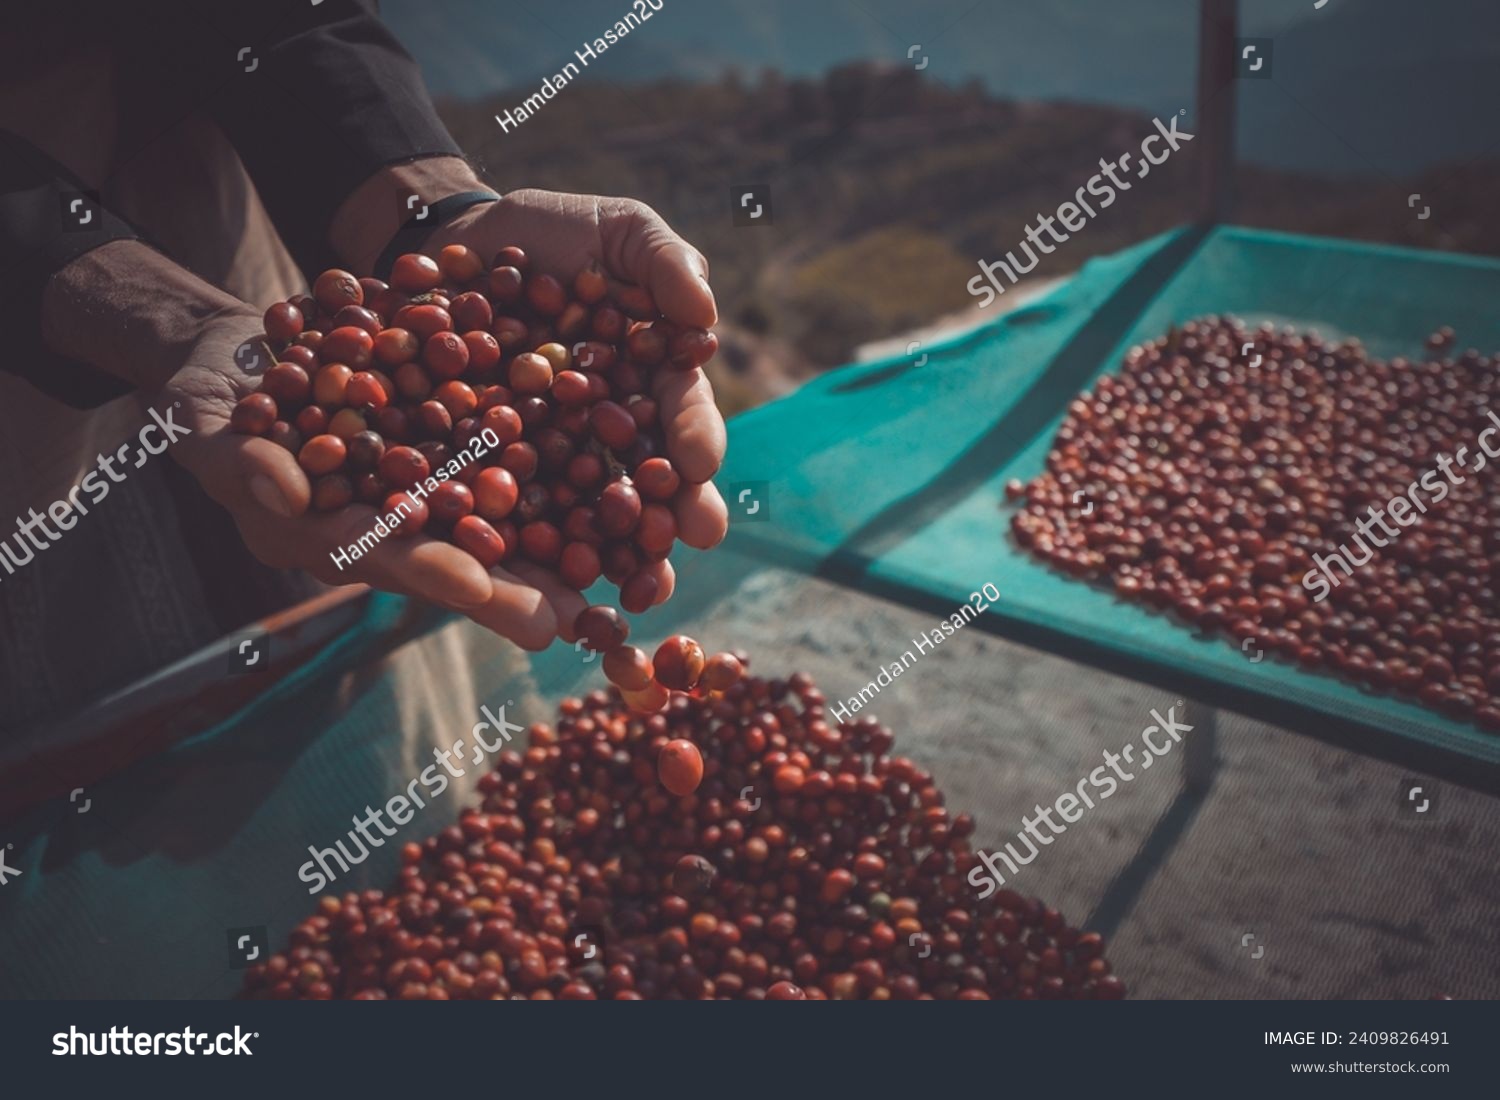 The famous Yemeni coffee beans, which are grown in the mountains of Yemen. #2409826491